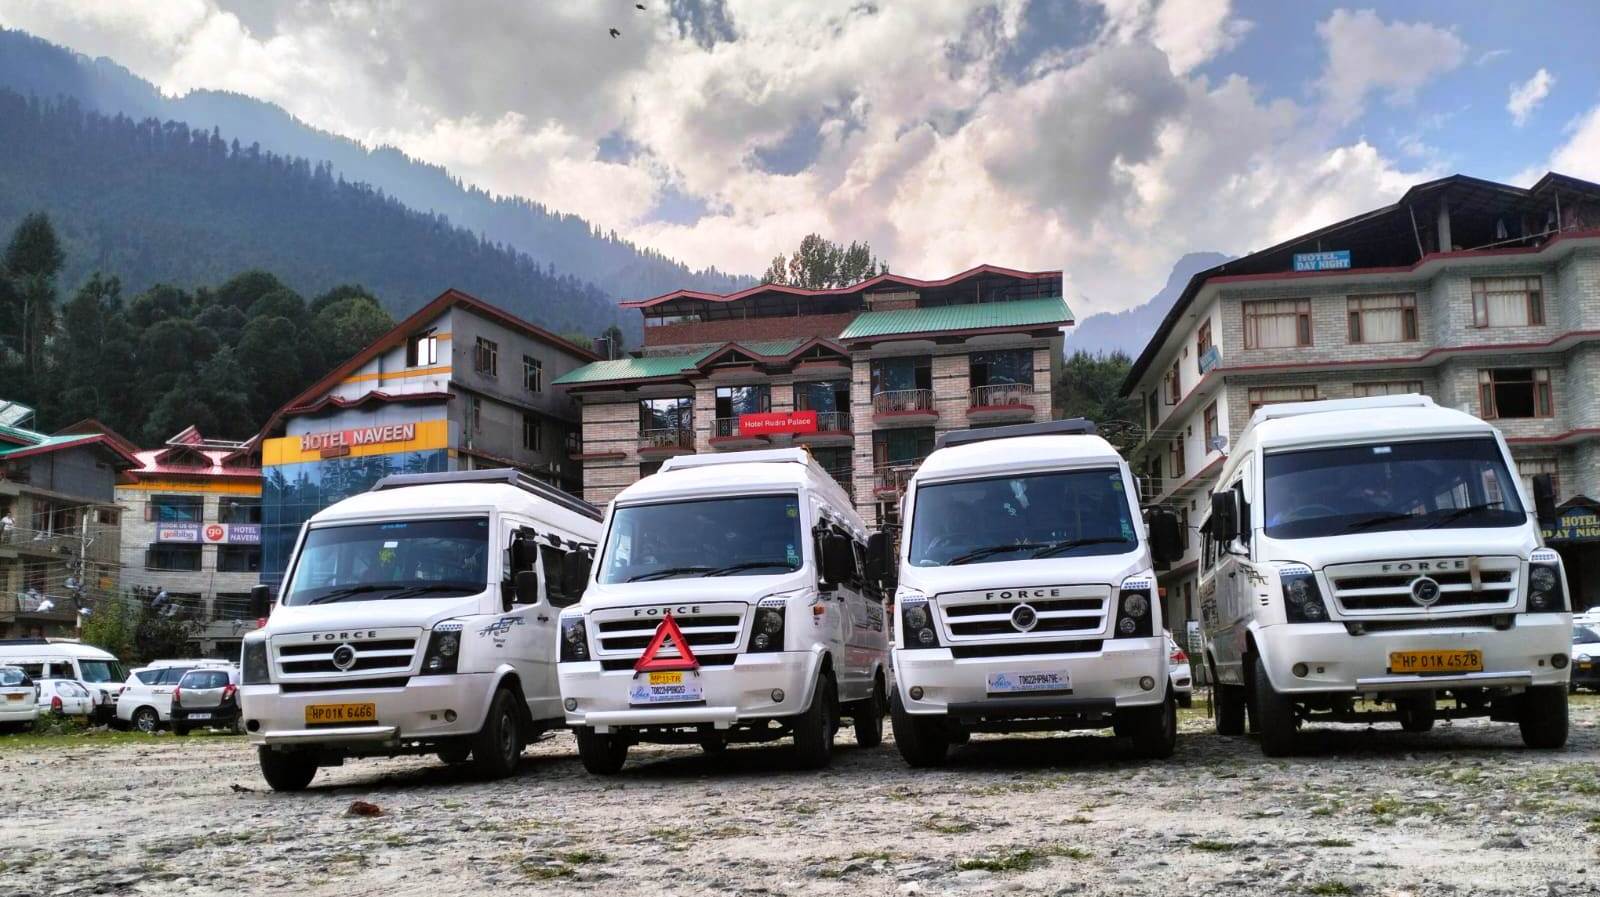 Manali Taxi Service - best taxi service in manali - manalitaxi.in